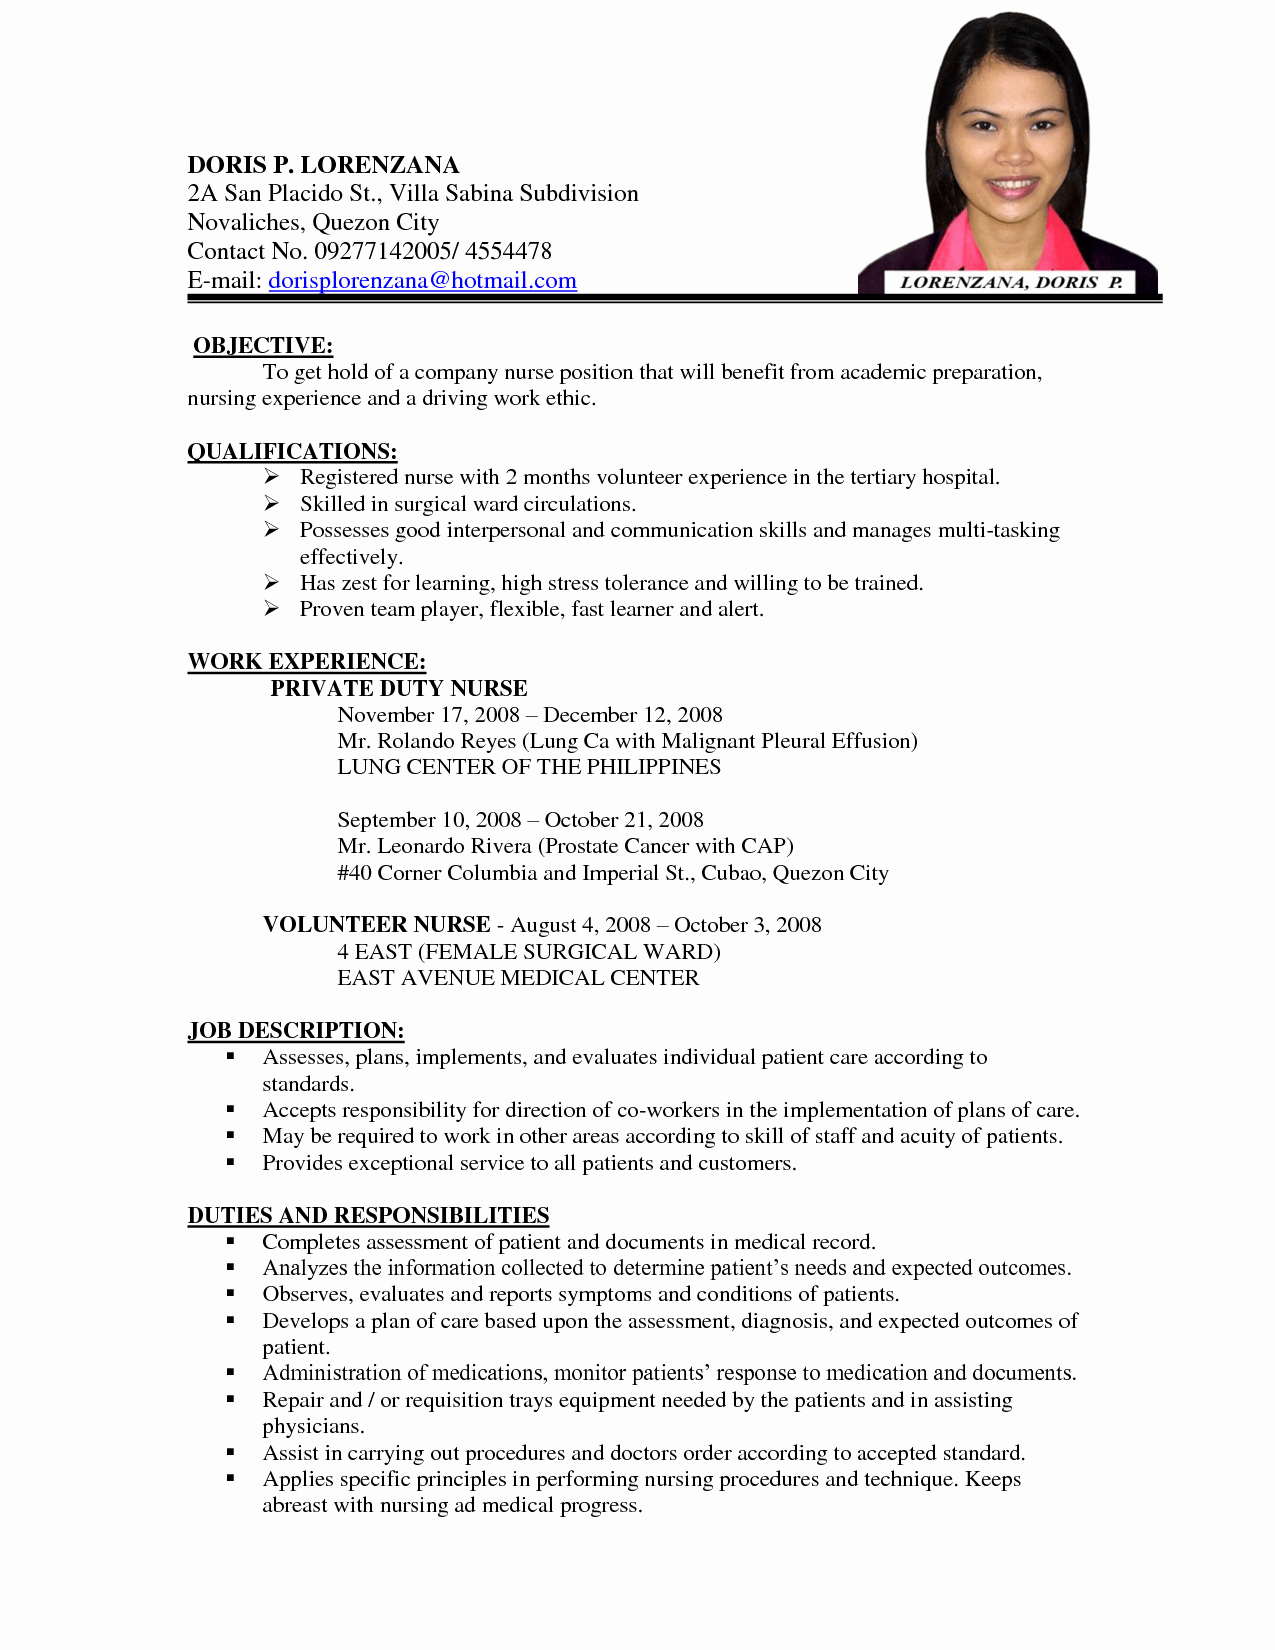 Image Result for Curriculum Vitae format for A Nurse